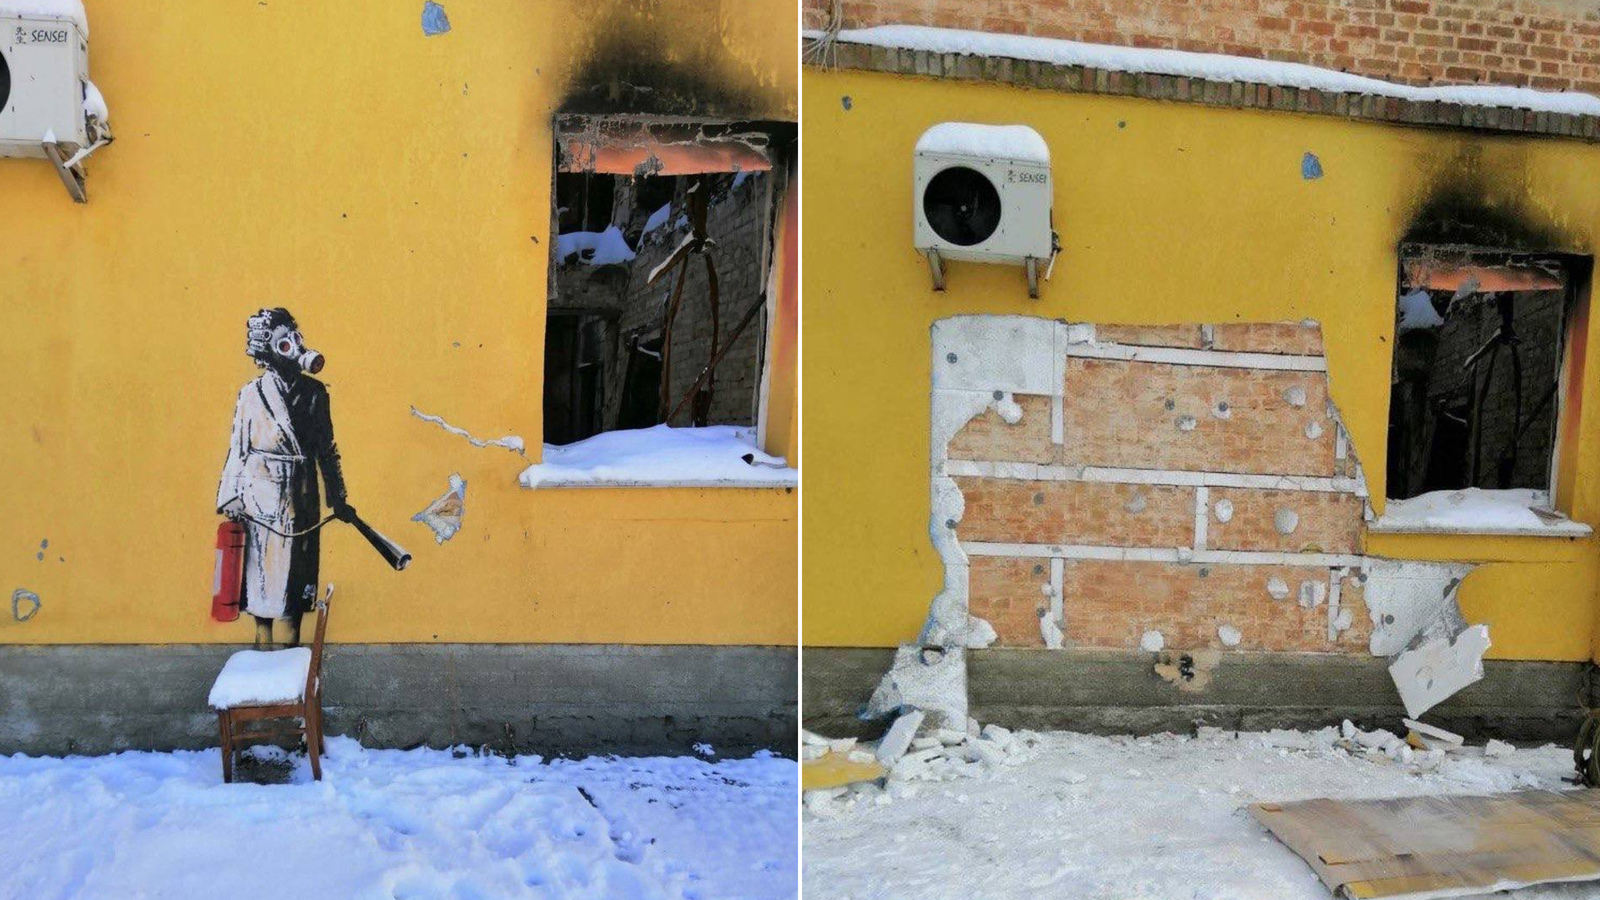 A group of people tried to steal a Banksy mural in Ukraine.